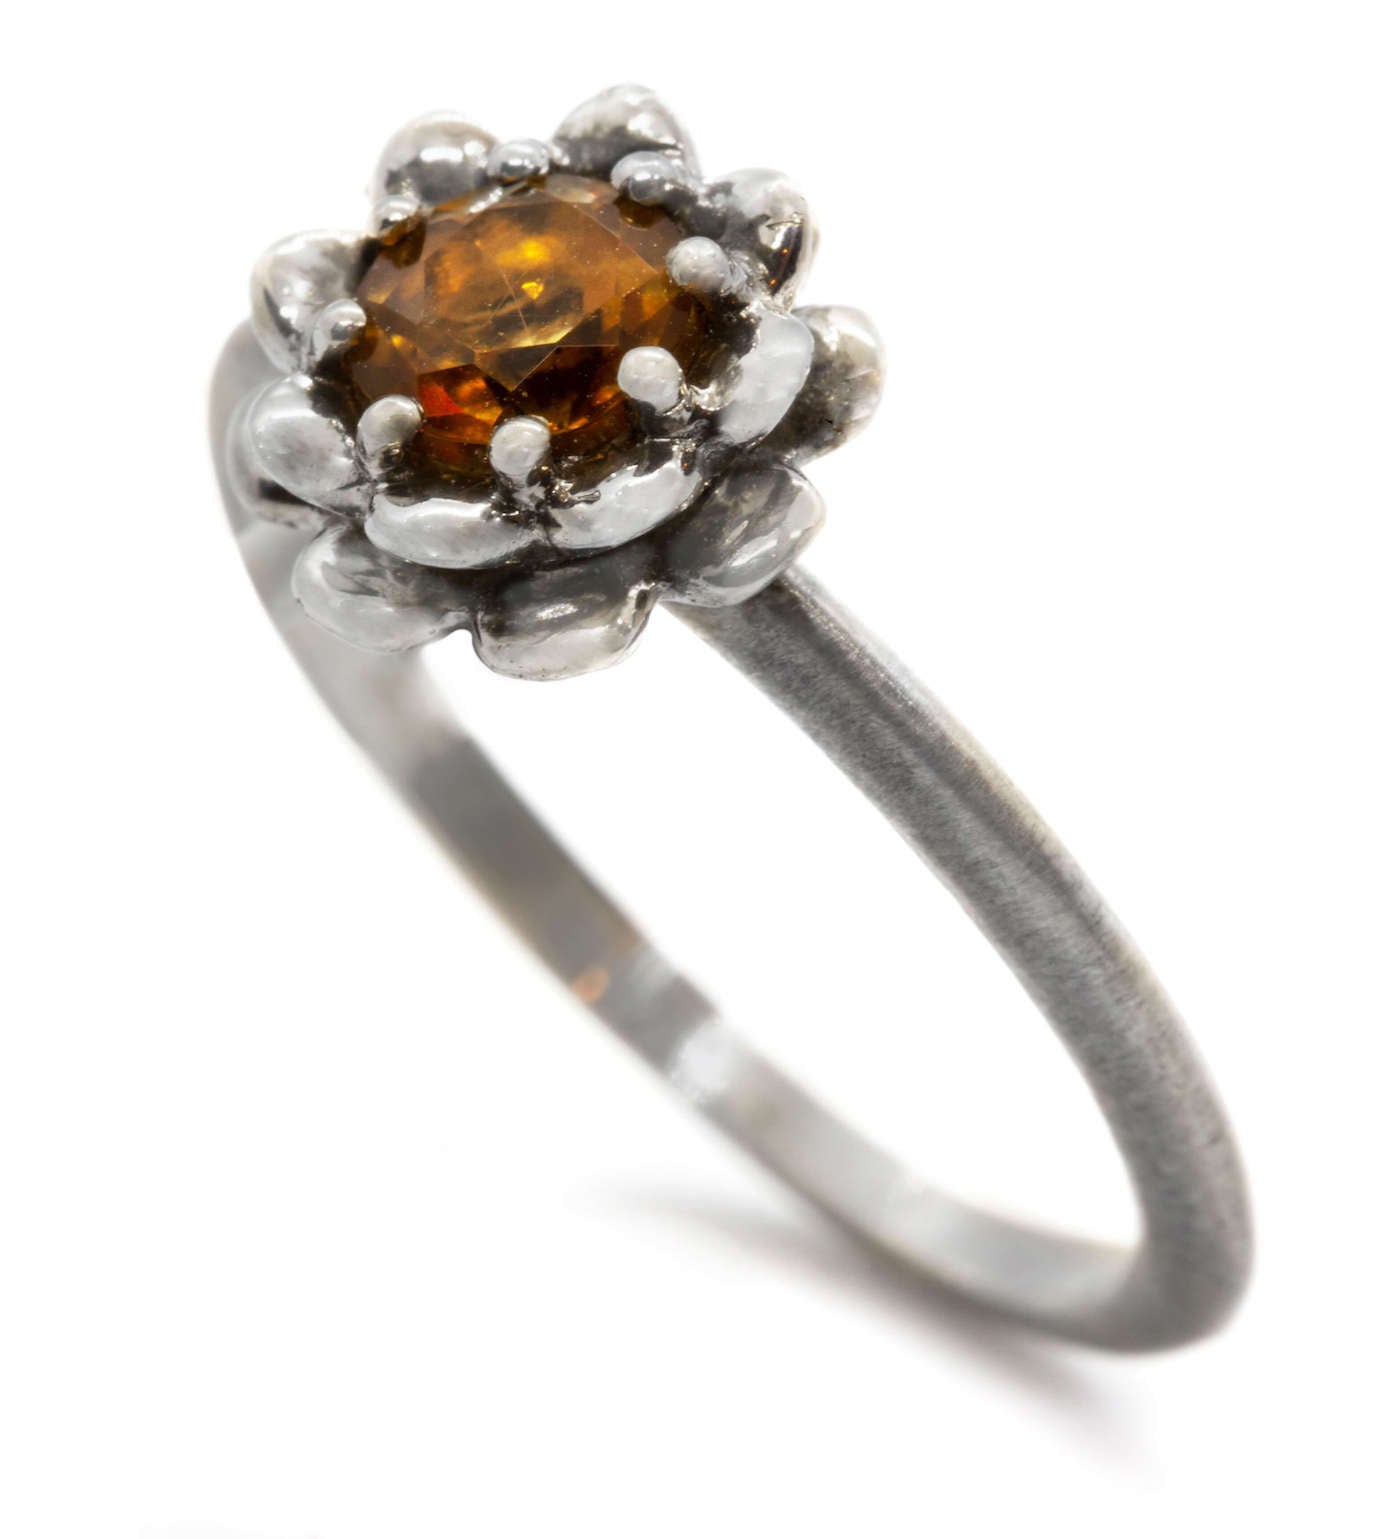 Flower Gemstone Ring angled view on white background